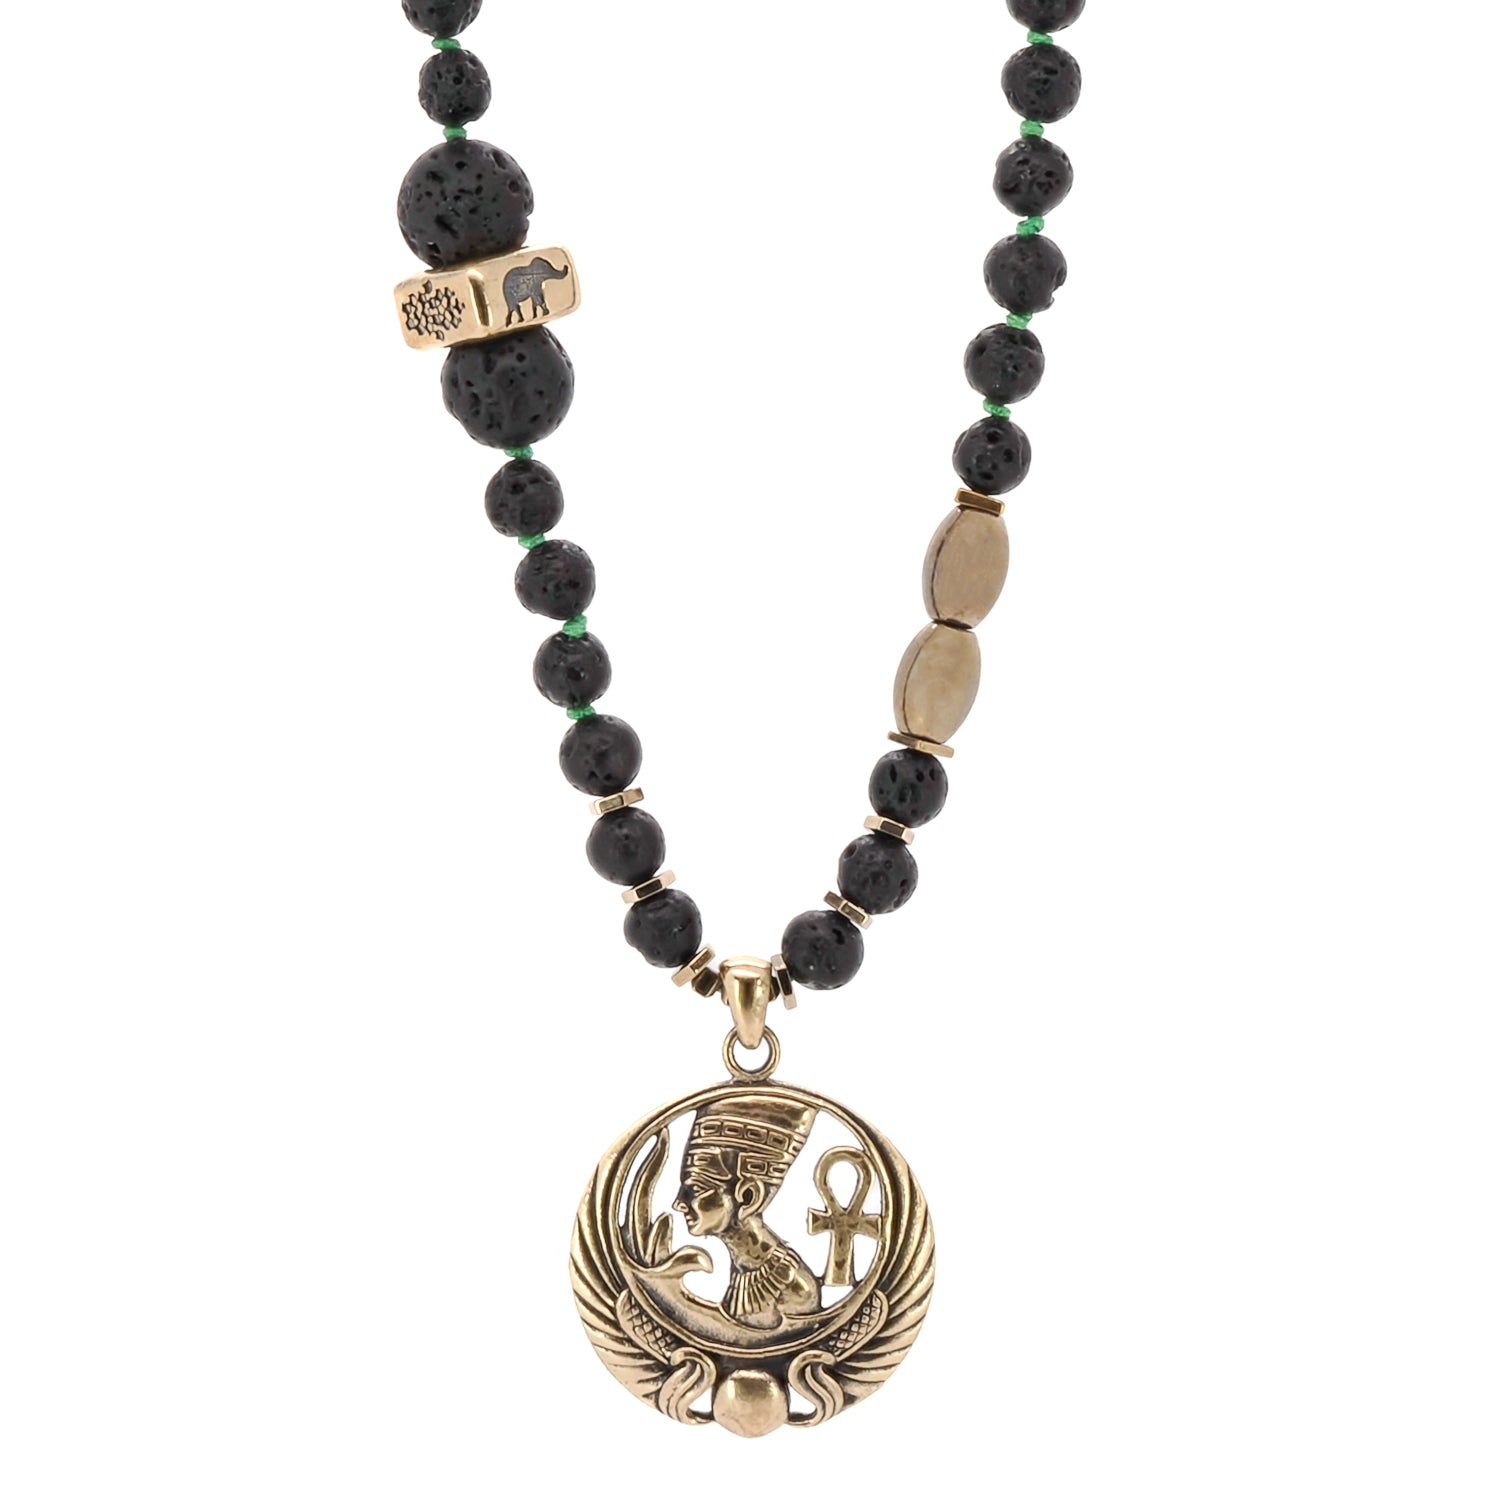 Black Queen Nefertiti Necklace with Nepal Mantra Beads and Hematite Tree of Life Bead